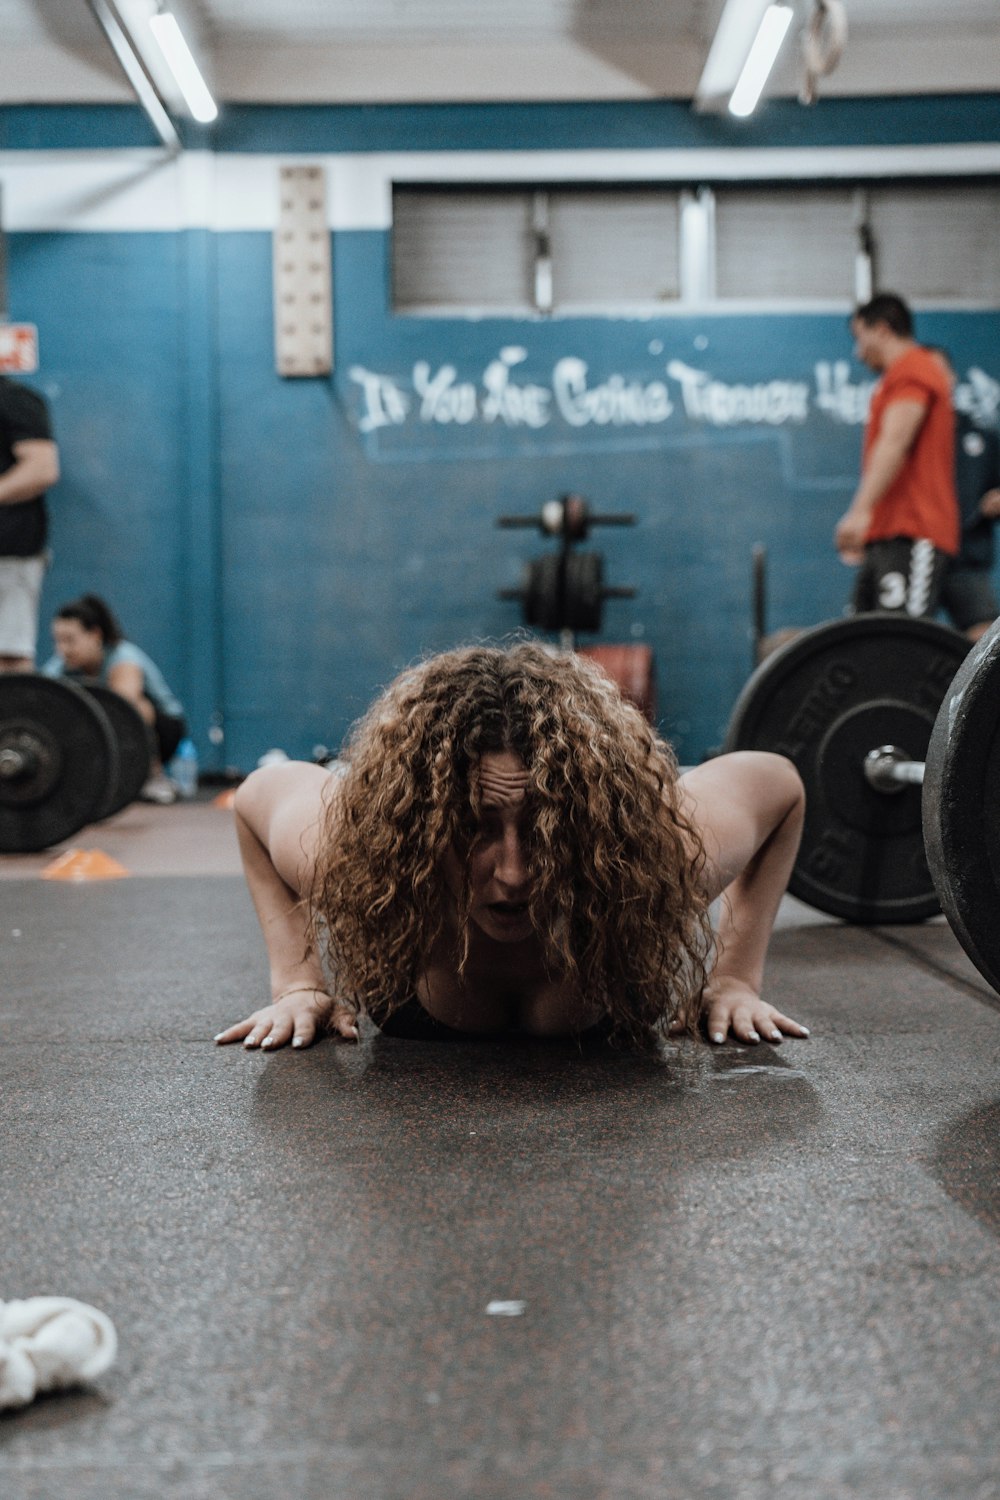 a woman squatting on the ground in a gym